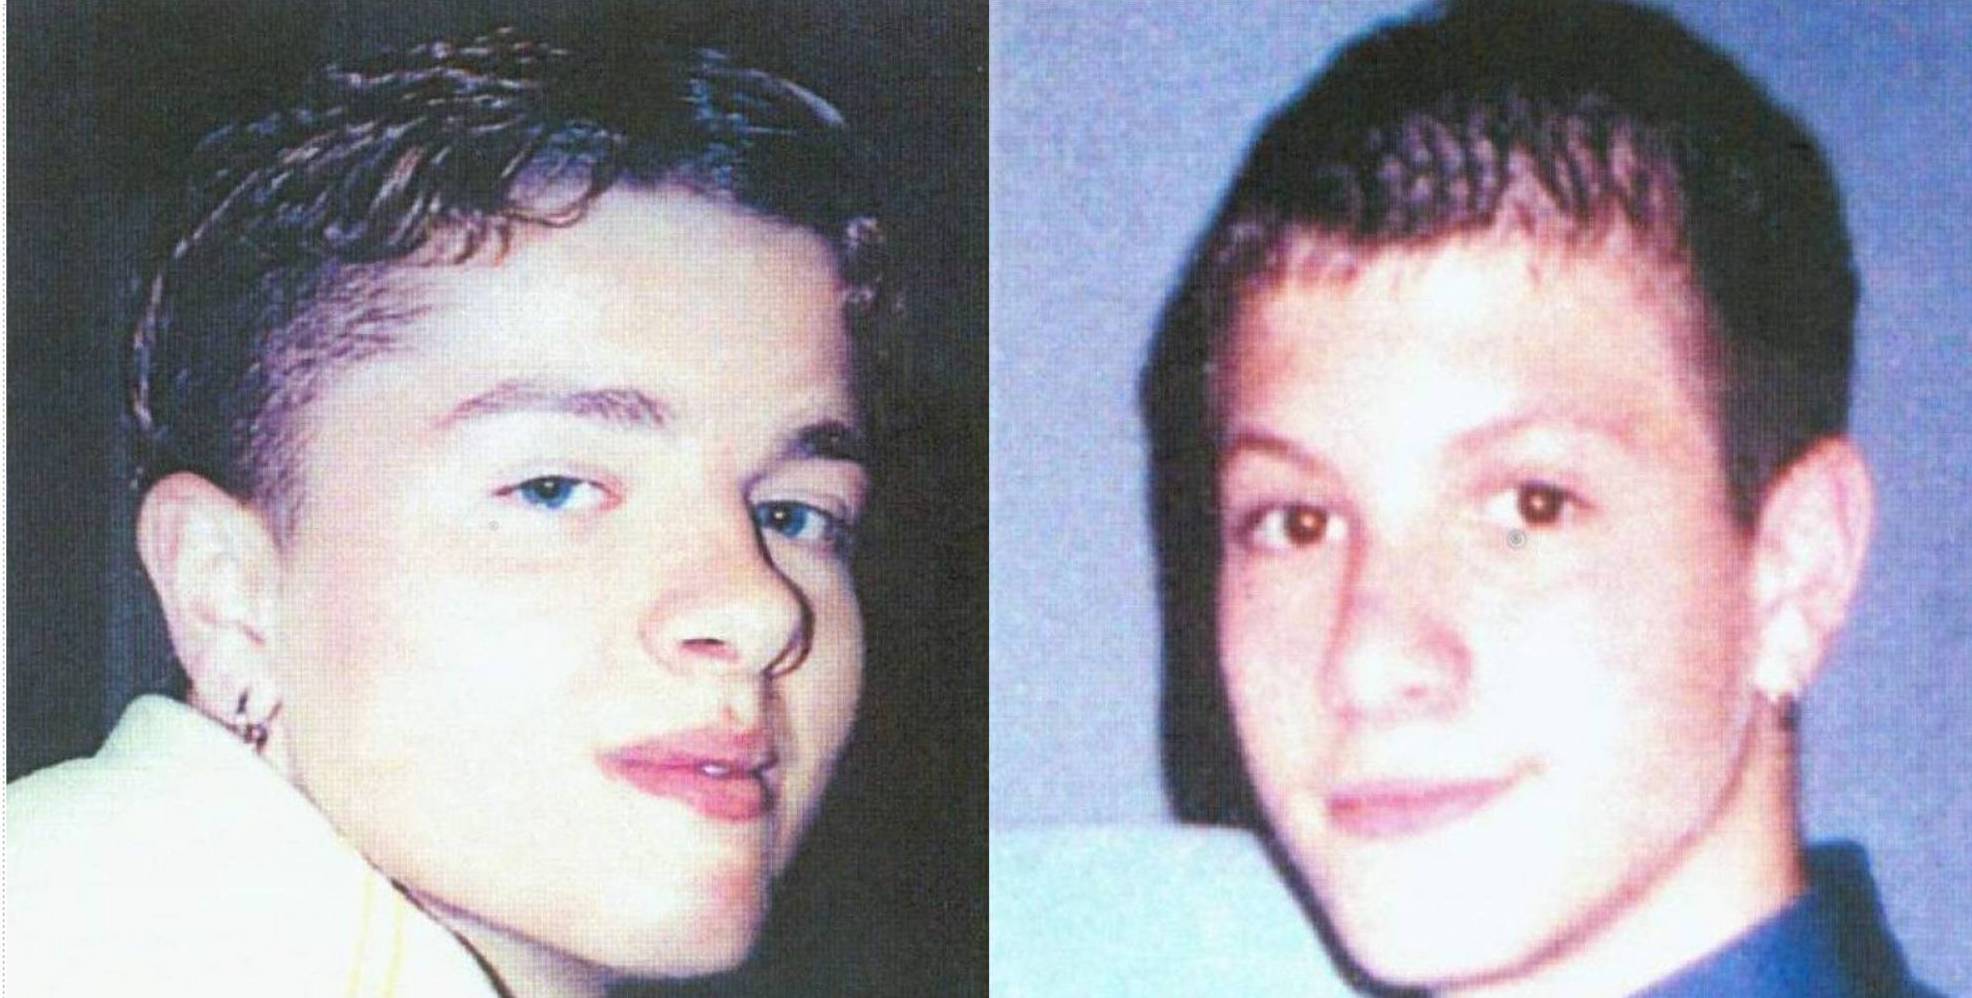 Accident or murder?  Police, families are still baffled by the boys’ 2002 death on a rural western Pennsylvania road